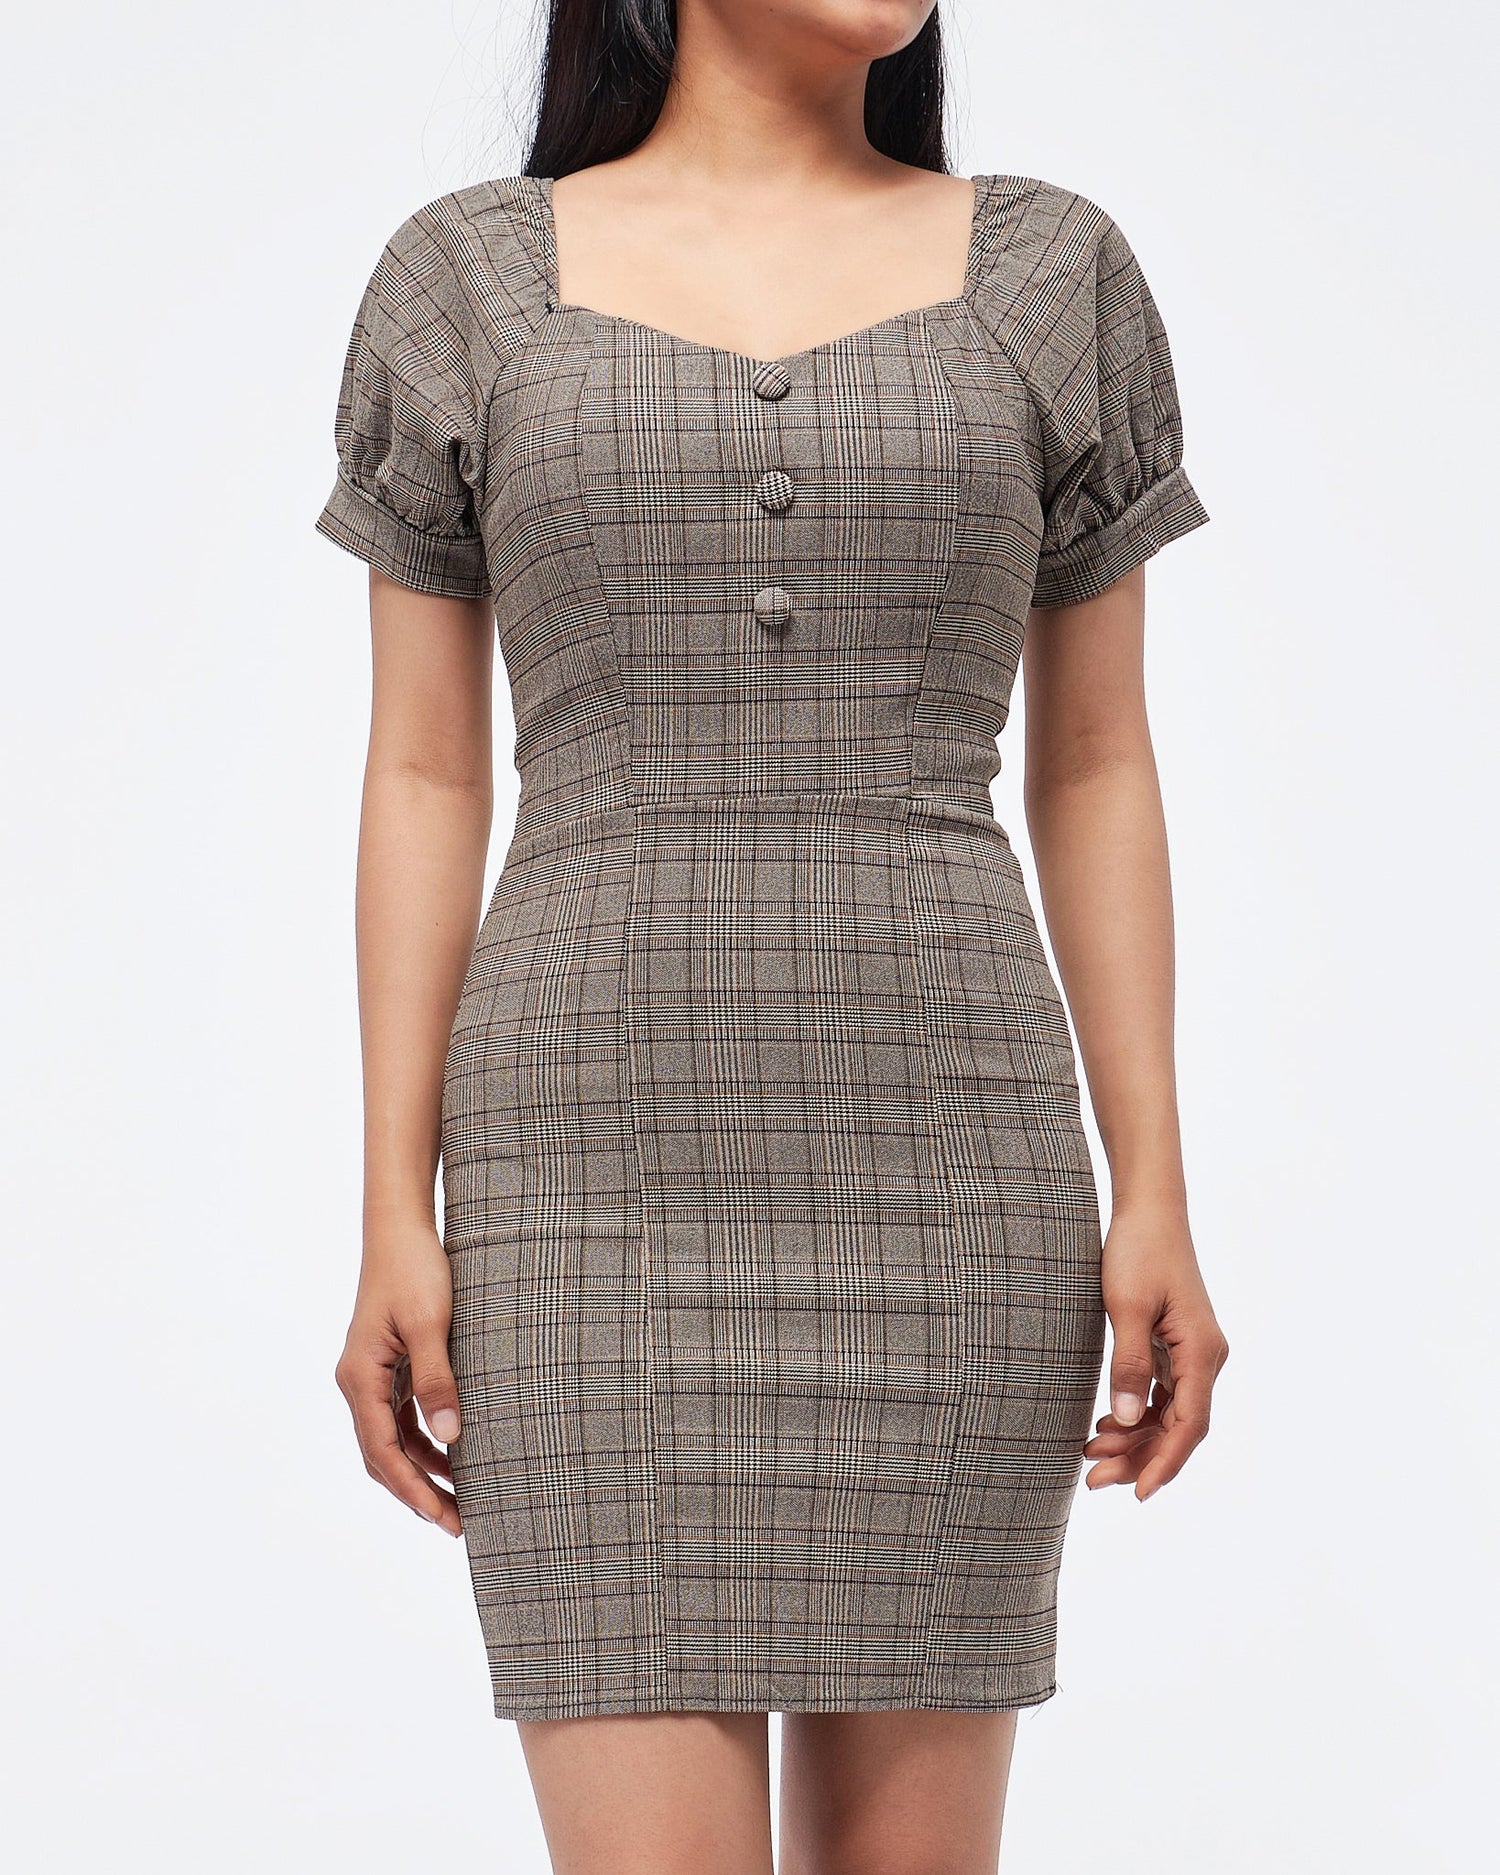 MOI OUTFIT-Vintage Checked Lady Dress 17.90